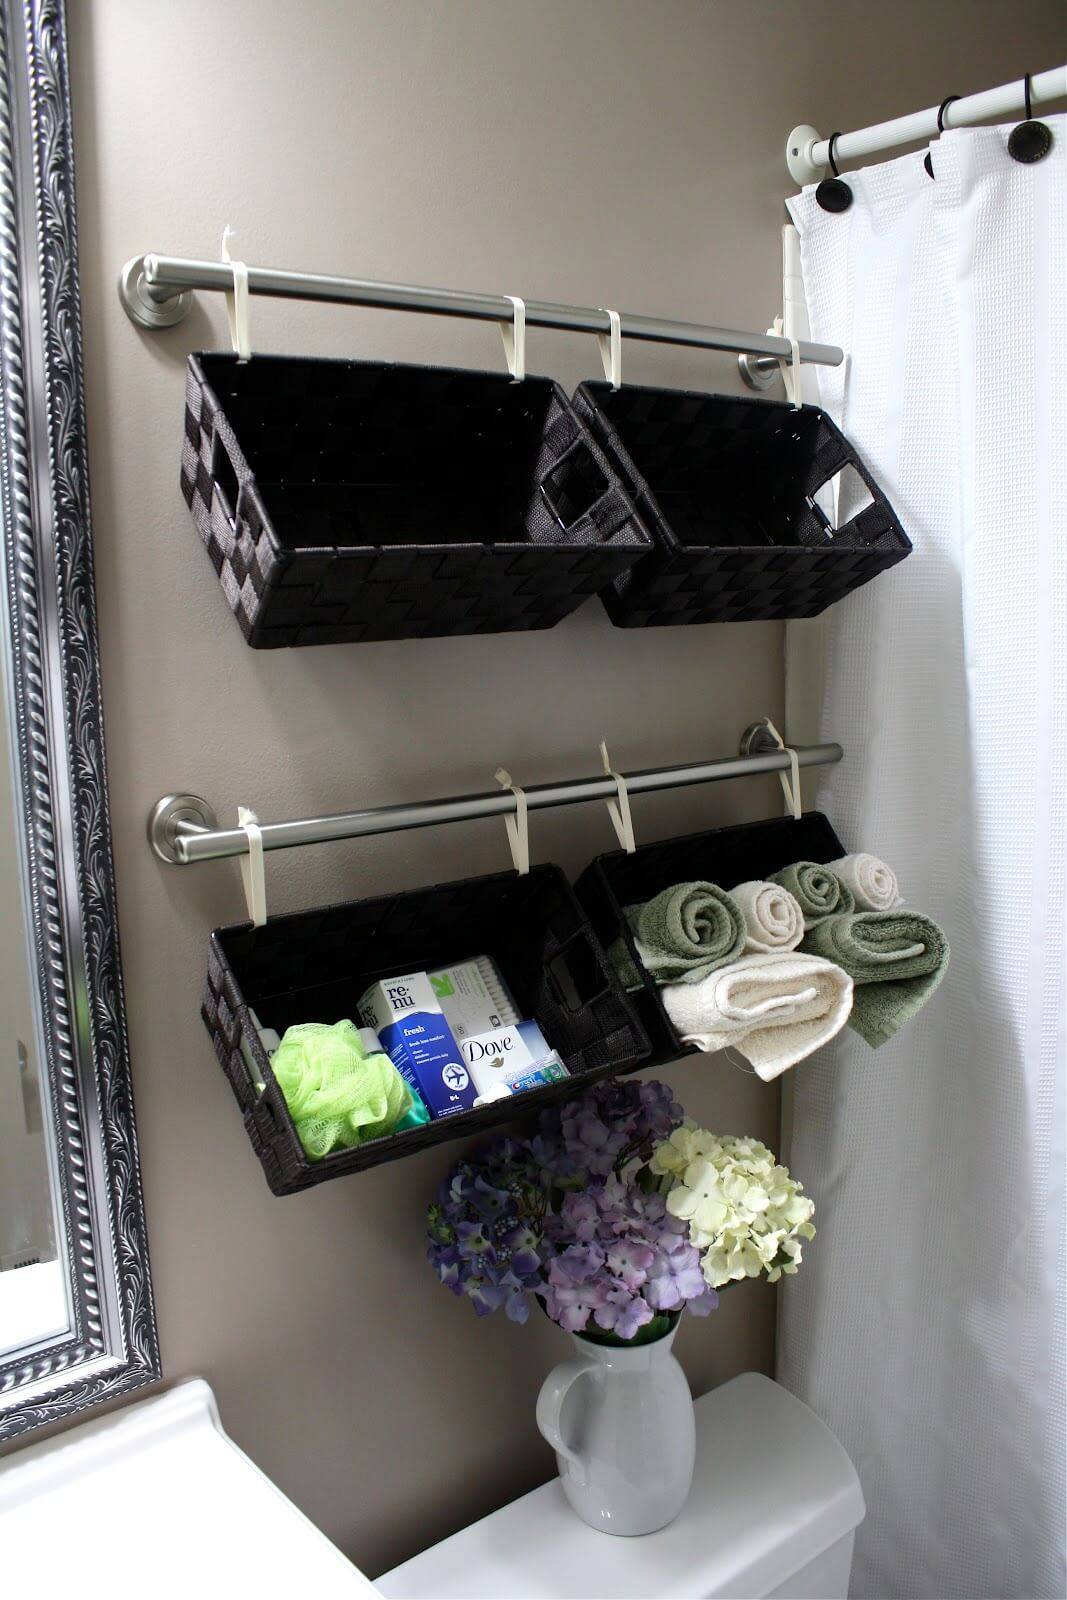 baskets hanging on a towel rod hanging over a toilet